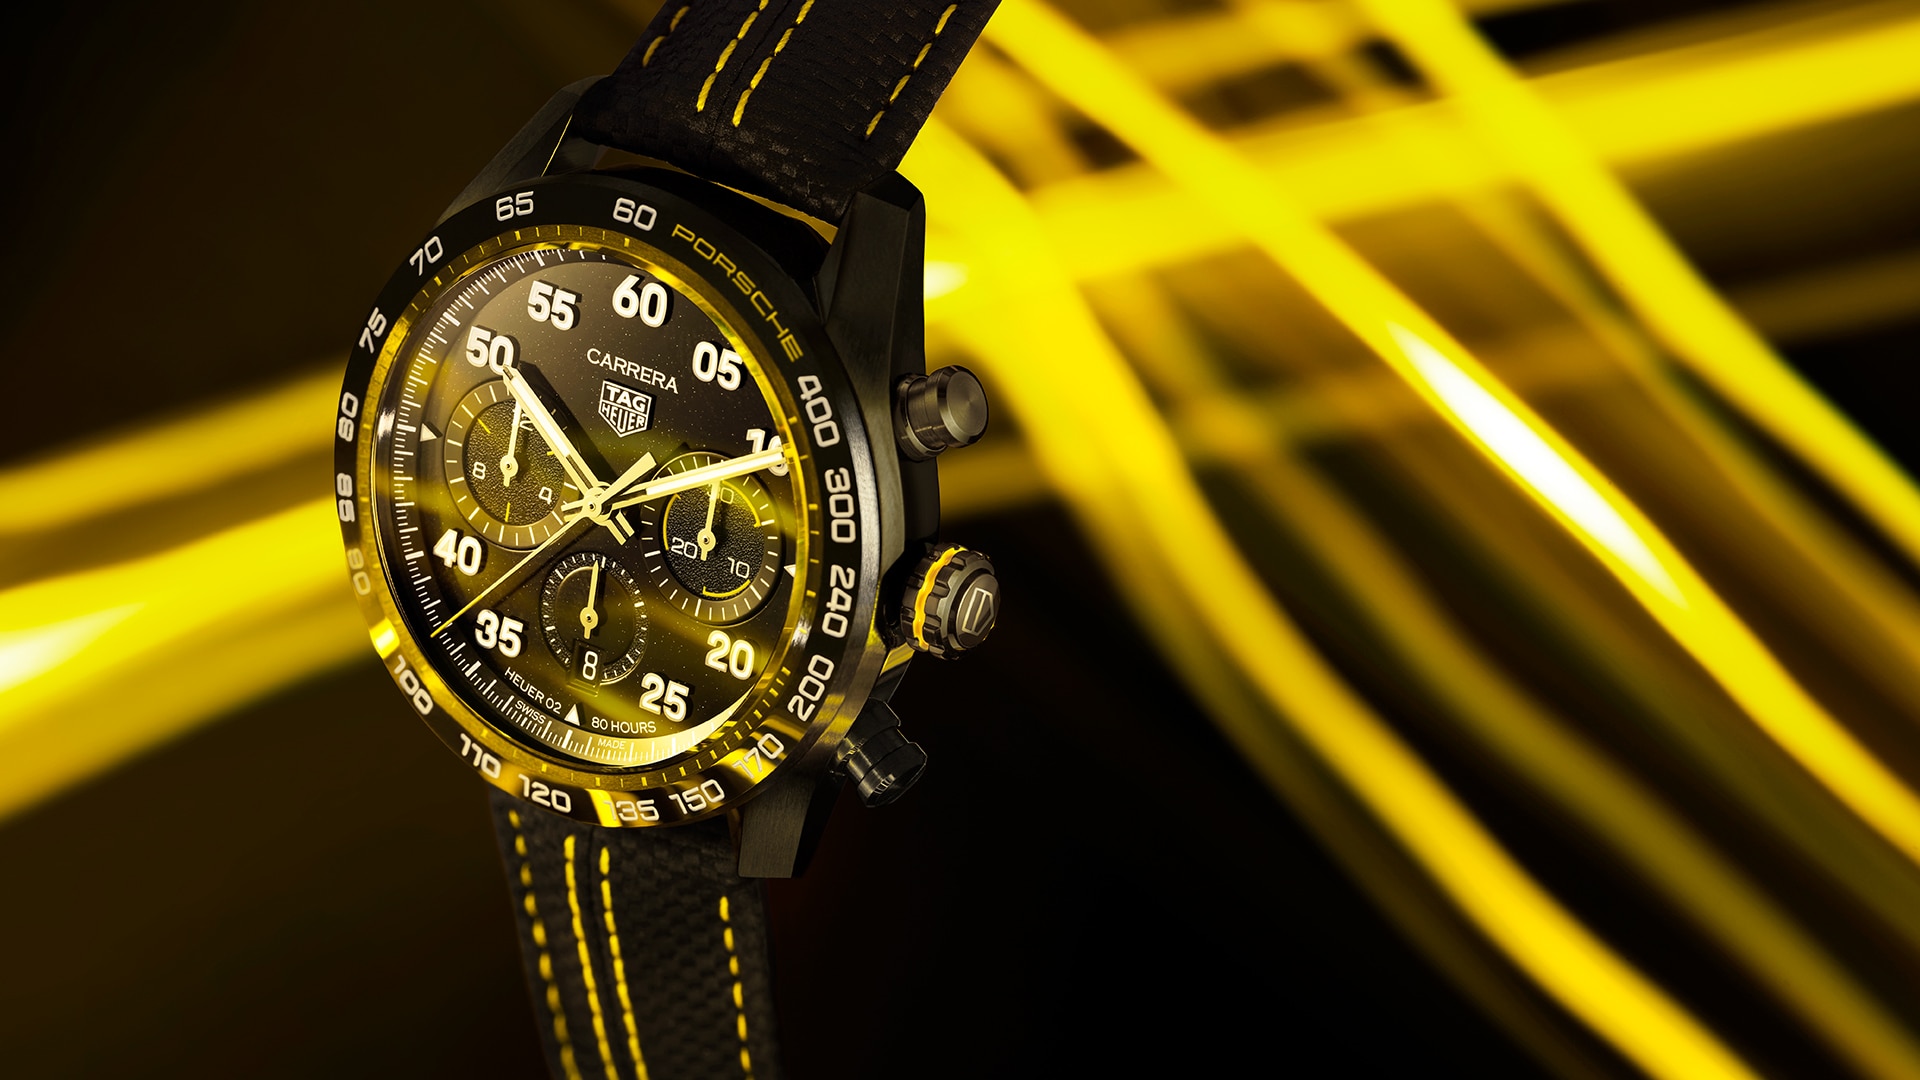 Patrick Dempsey and Porsche Design Introduce a Limited-Edition Watch